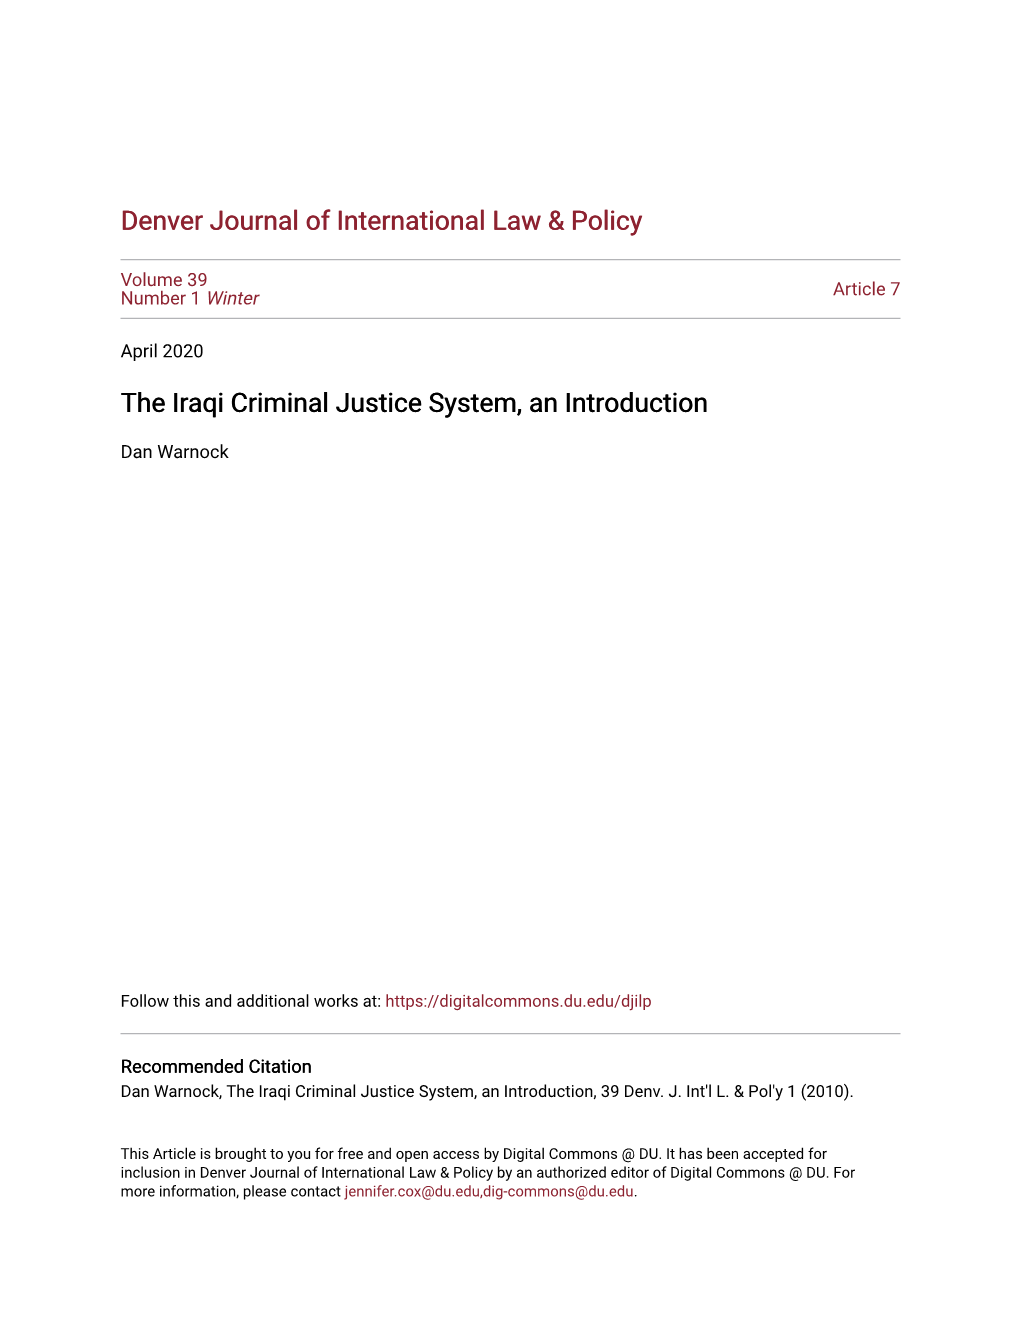 The Iraqi Criminal Justice System, an Introduction